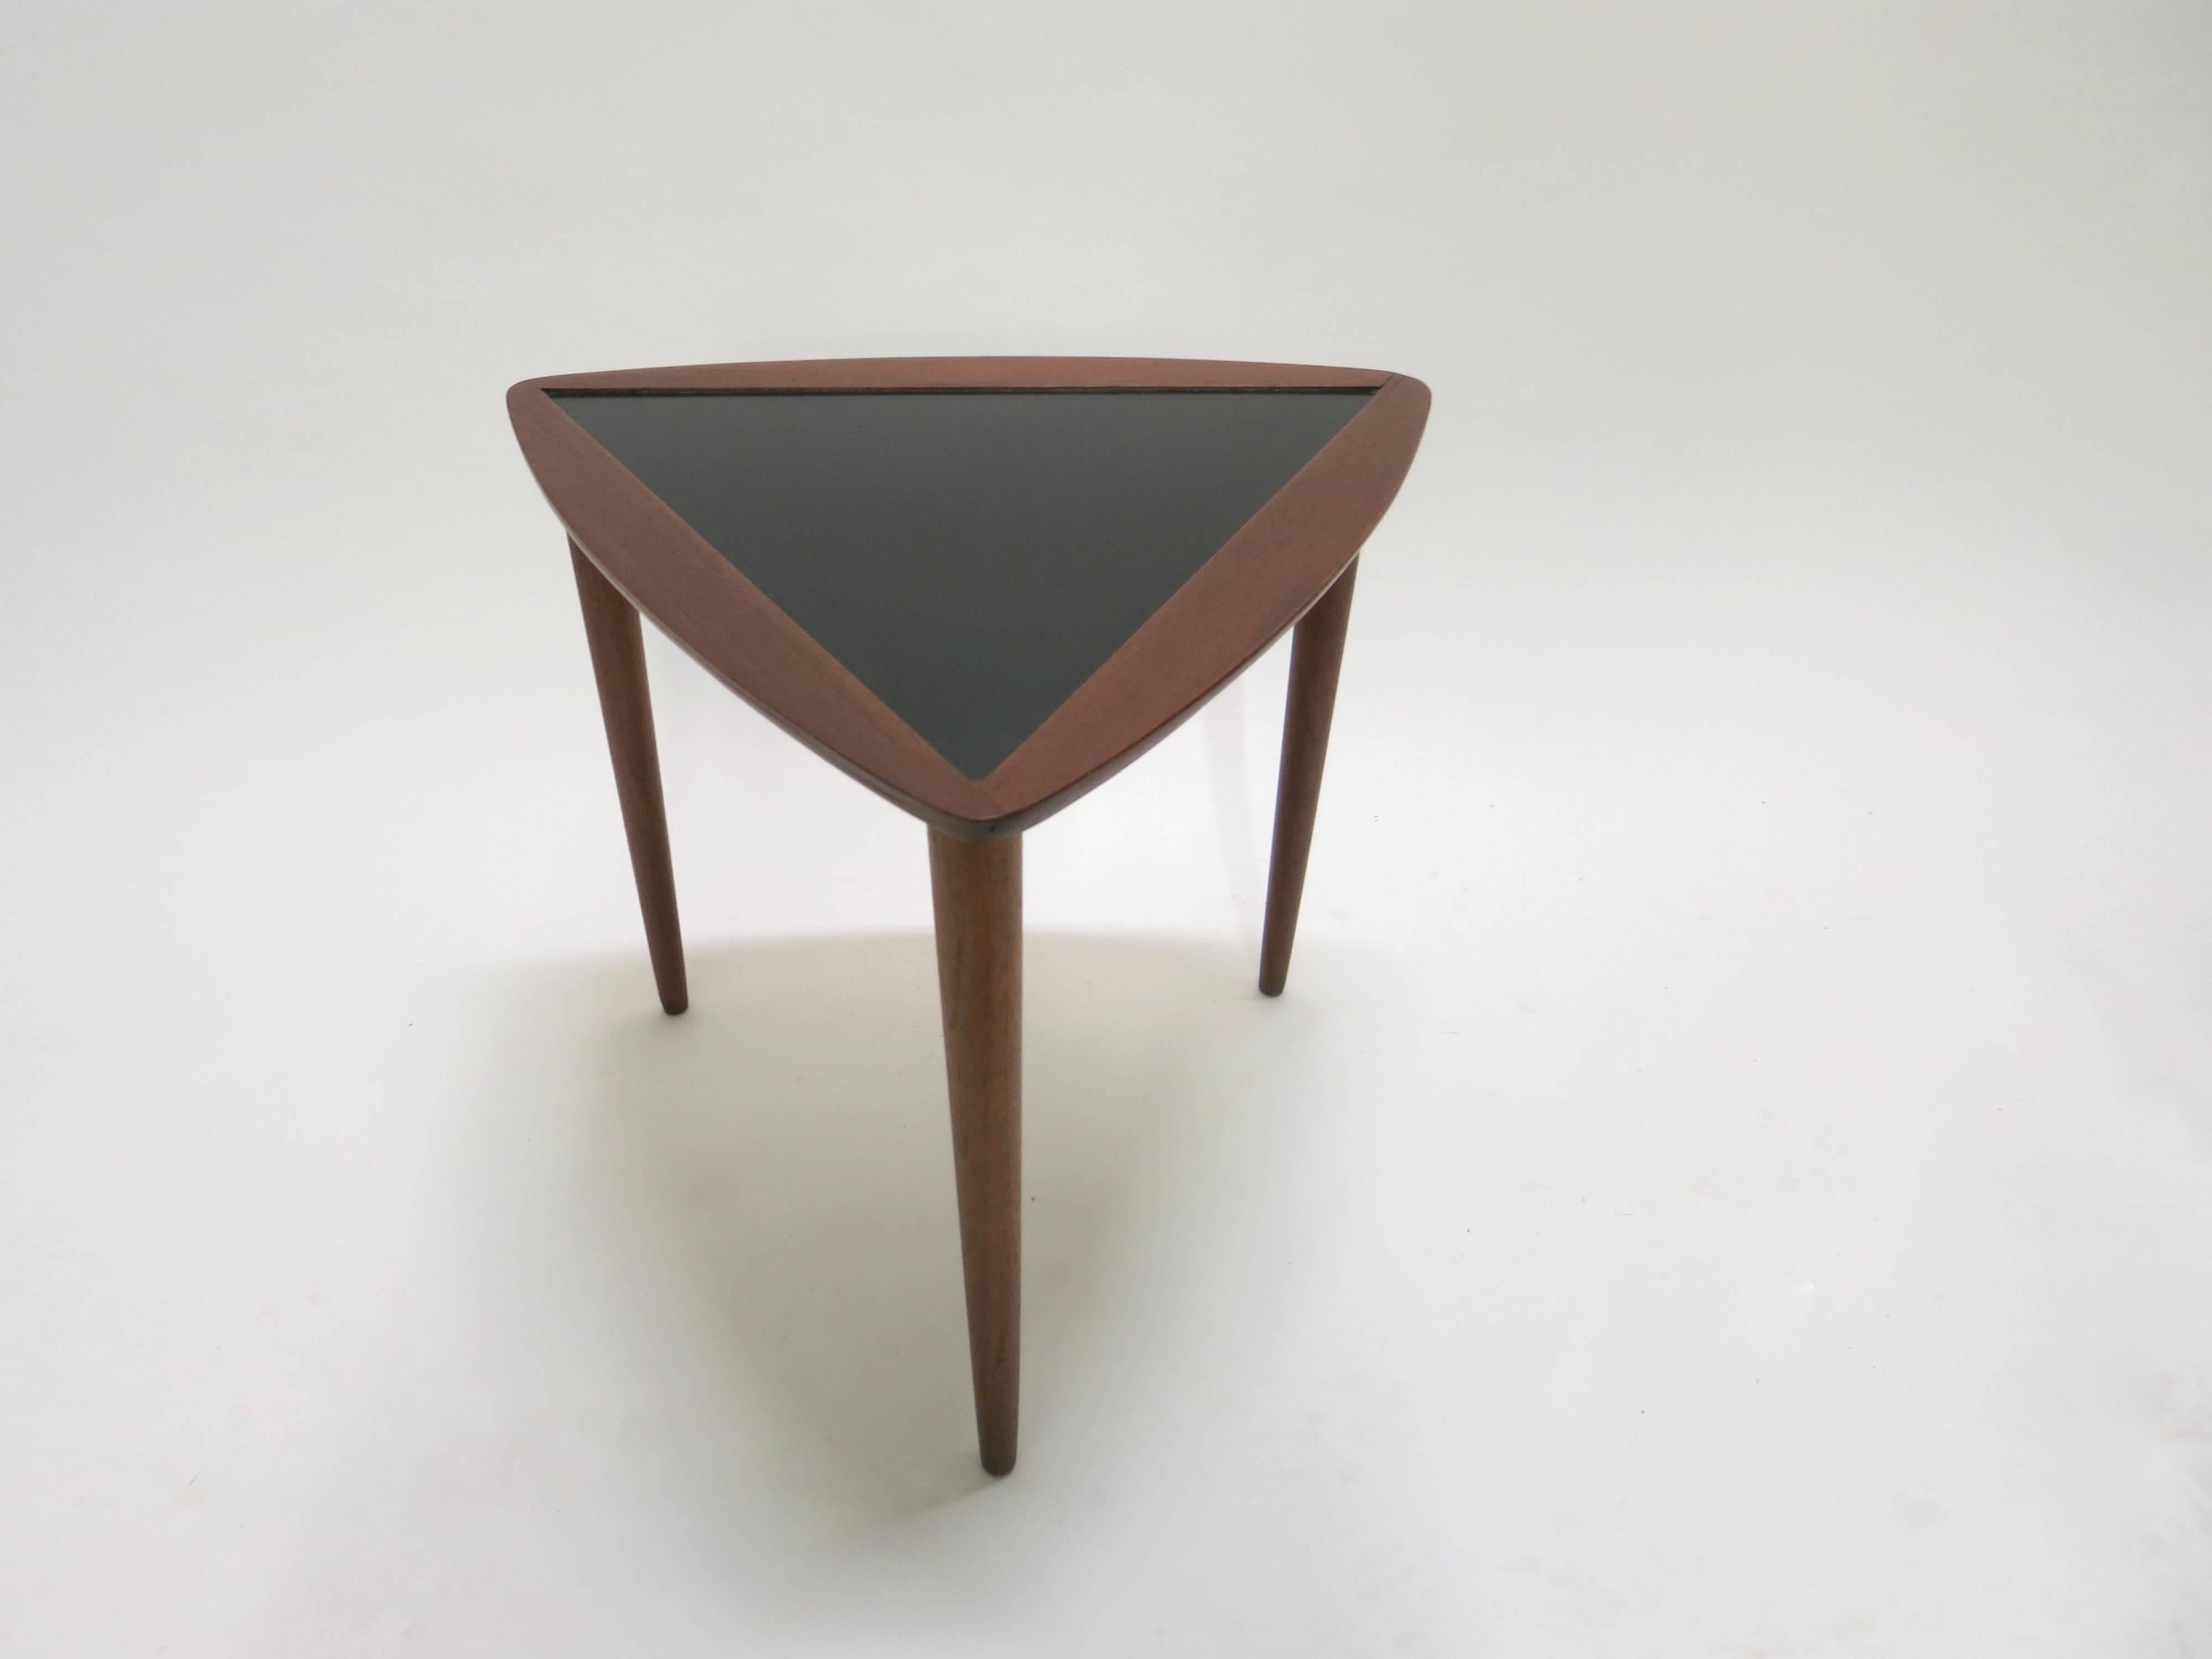 Three triangular stacking tables have an inset black laminate top framed in walnut each with three tapered spindle legs also in walnut. Sturdy strong tables in excellent condition.